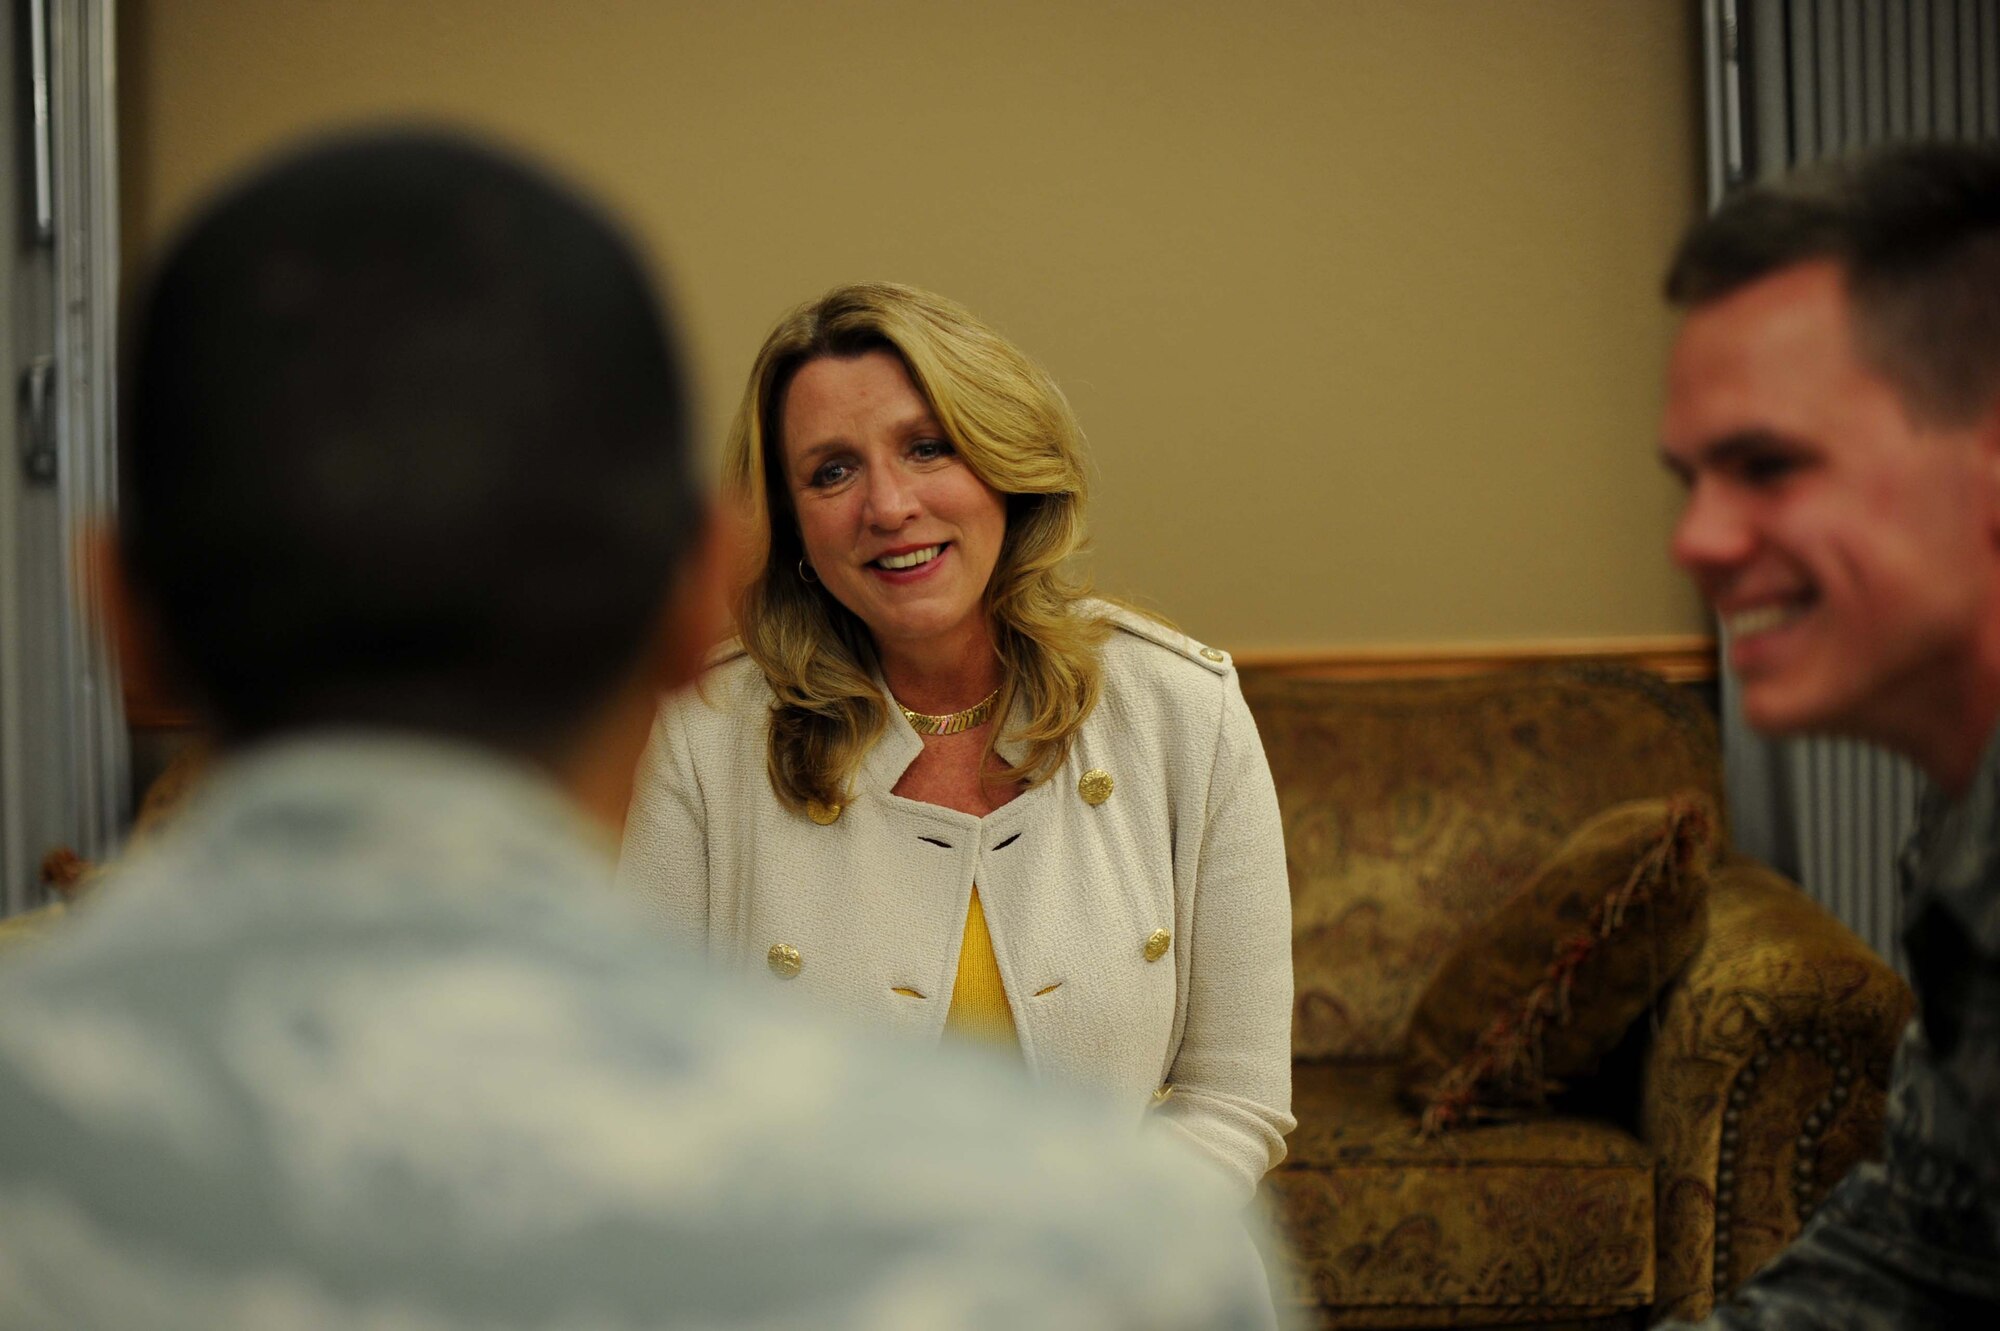 Secretary of the Air Force Deborah Lee James speaks with Airmen, July 29, 2016, at McConnell Air Force Base, Kan. During her visit to the base, James interacted with Airmen in several different ways, one of which was her first speed mentoring session, where she had two-way conversations with small groups of Airmen. (U.S. Air Force photo/Airman 1st Class Jenna K. Caldwell)